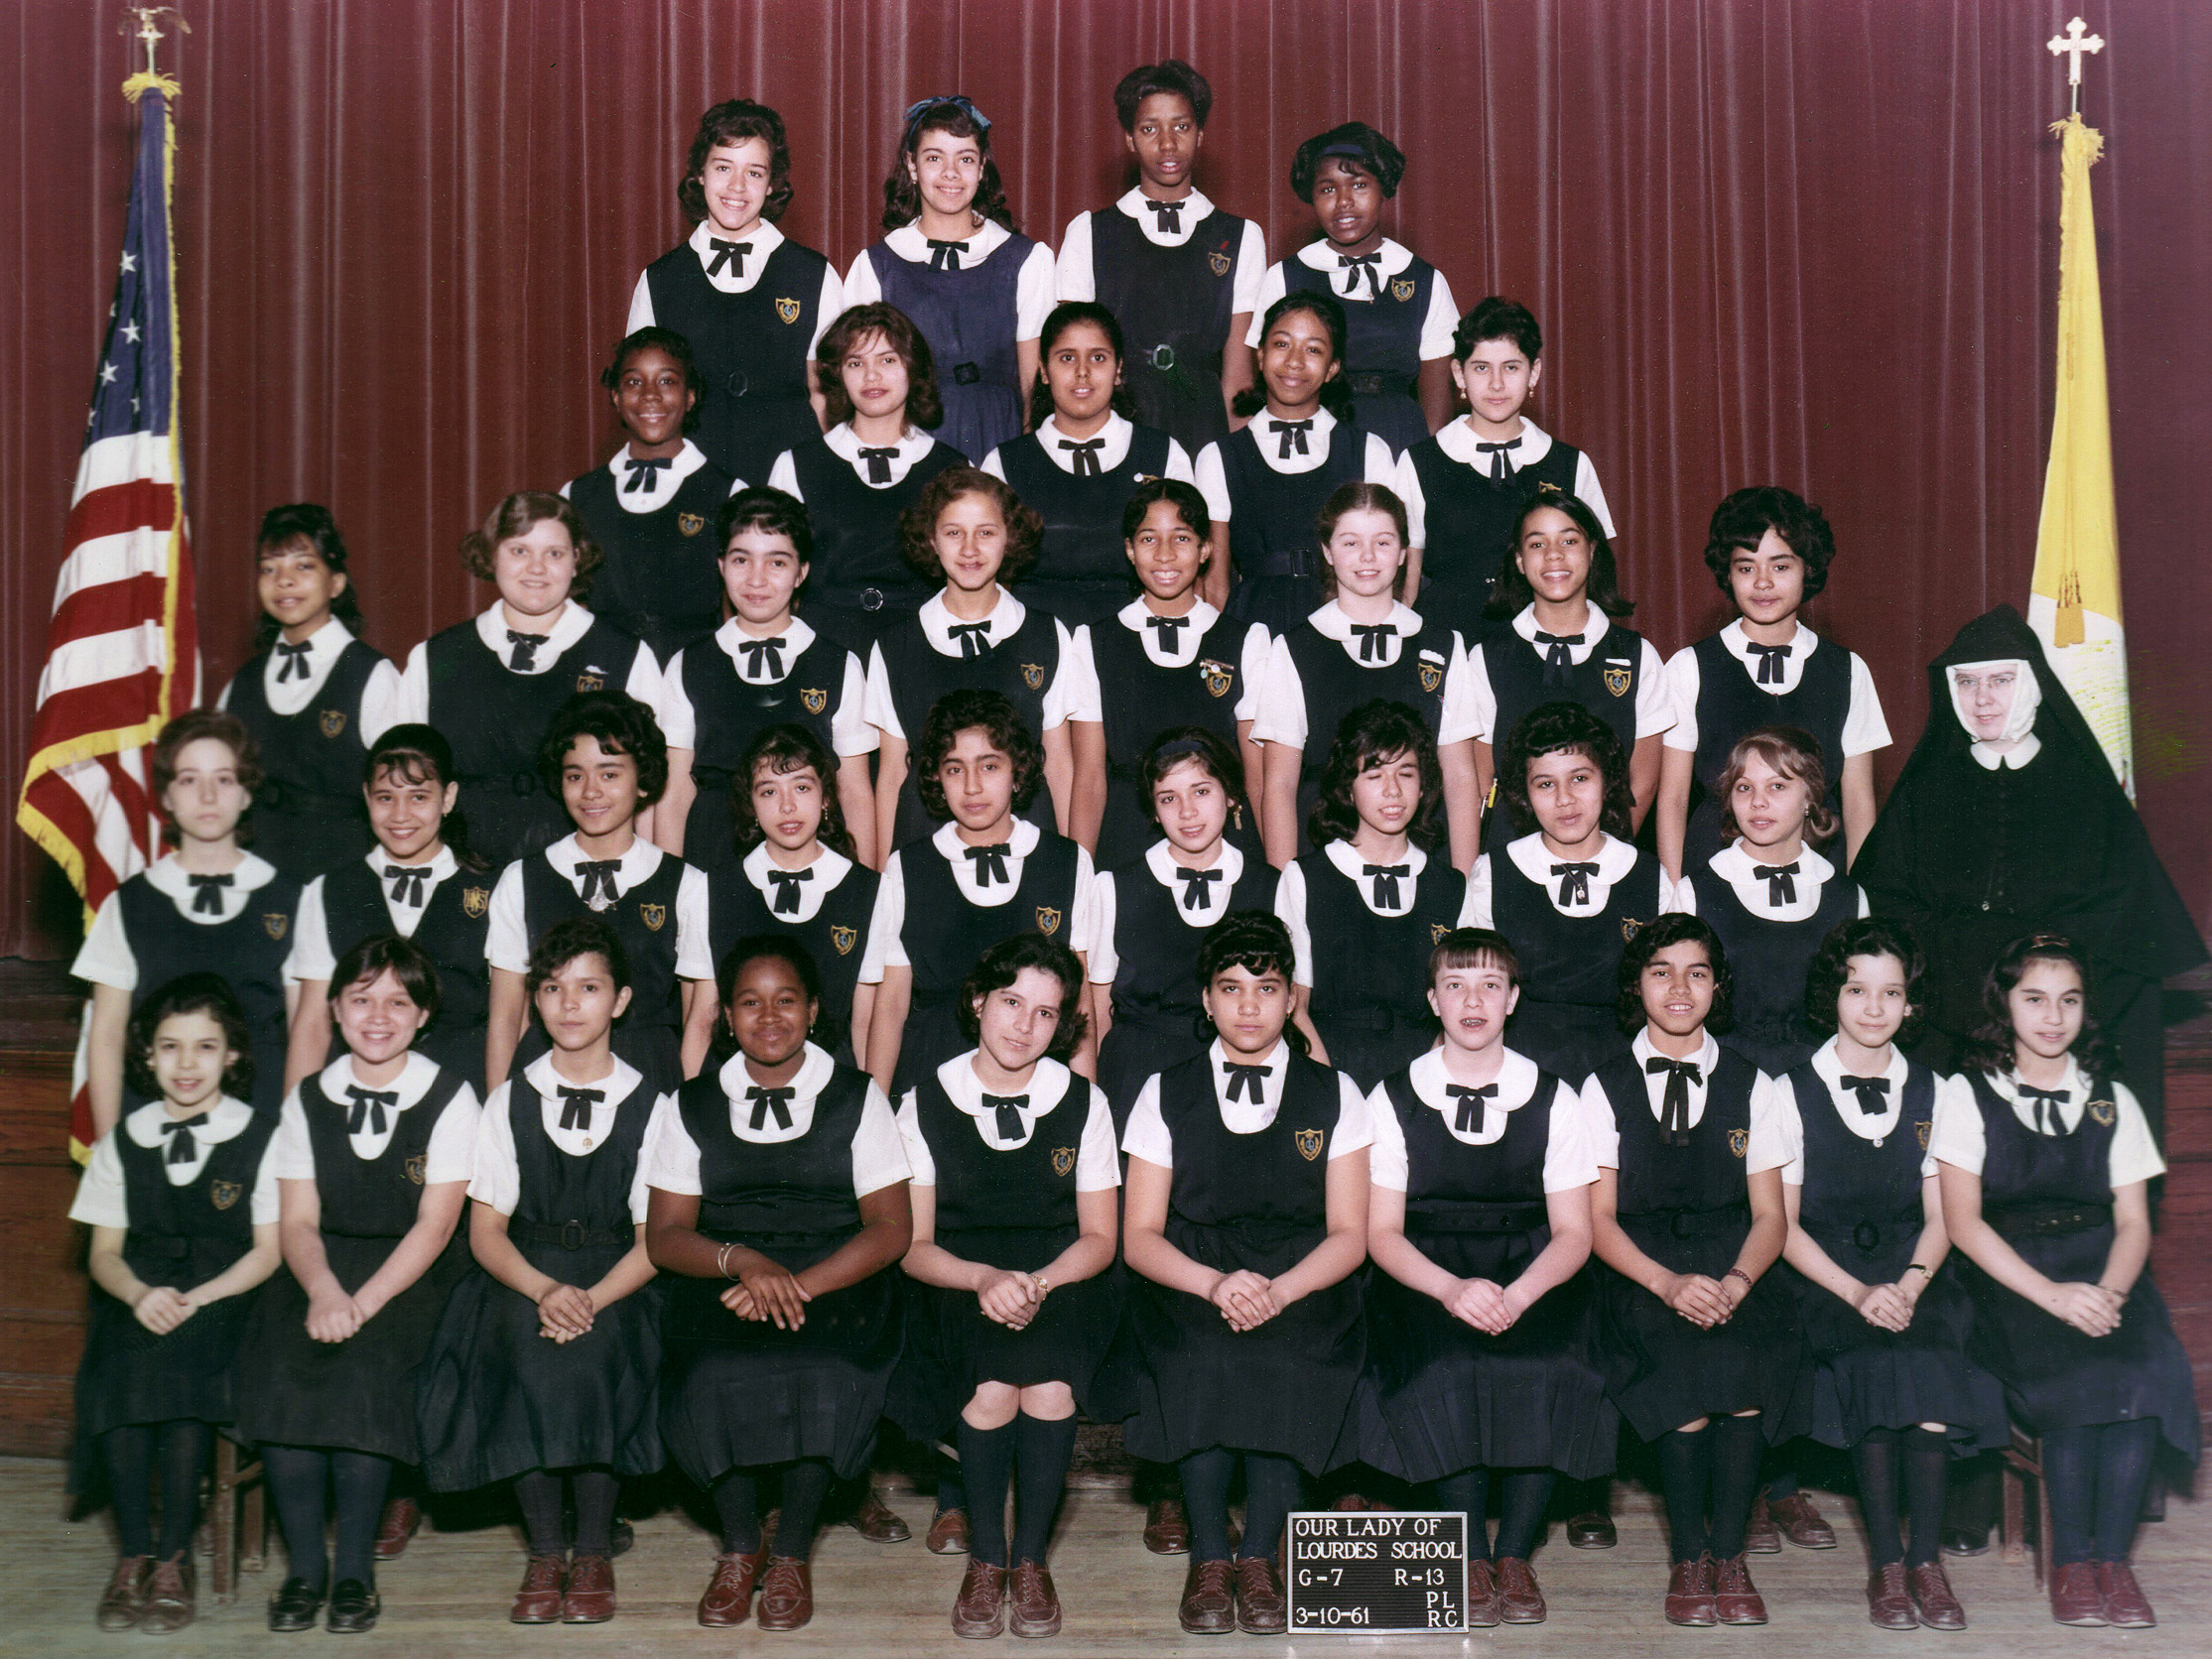 7th Grade Class at Our Lady of Lourdes School, 1961. I am in the back row at the right. View full size.

I had 35 girls as classmates; from the 5th to 8th grades the girls and boys were separated into same-sex classes, as it was believed at the time to be less of a distraction for students, so their focus would solely on getting an education. Still had a diverse group of students in March, 1961. I believe we would all pass our tests and be promoted to the 8th grade together.

It was in the 7th grade that I realized what the coveted position of being one of few teacher's pets entailed.  Being an only child, I felt lucky to have a first cousin attending the same school in a grade ahead of me to act as the big brother I didn't have, so when I discussed my new class position with him he just laughed at first and then schooled me on the reality of how the other students would soon treat me differently. Frankly, I didn't believe him, but a week later I noticed the change in attitudes and I also noticed that whenever the teacher was away from the classroom I was asked to monitor everyone's behavior and report any activity to her with names and what that person did or said: a rat fink, oh no. I definitely did not want to have that label because at lunchtime I wouldn't have anyone to jump rope with, and that was my favorite activity during that time period. I would be stunned, and outcast!!!

Did know that I was also being monitored and reported on as well and before long, I no longer had my desk right next to the teacher's, and in fact I was closer to the back of the room, not that far away from the ones who the teacher had said didn't want to learn anything.  I noticed my friendships were never the same, as I learned a lesson for myself from that brief experience: enjoy the company of others but not to depend on having it when you may need it the most, and self-reliance; stand alone and stand strong, if need be.